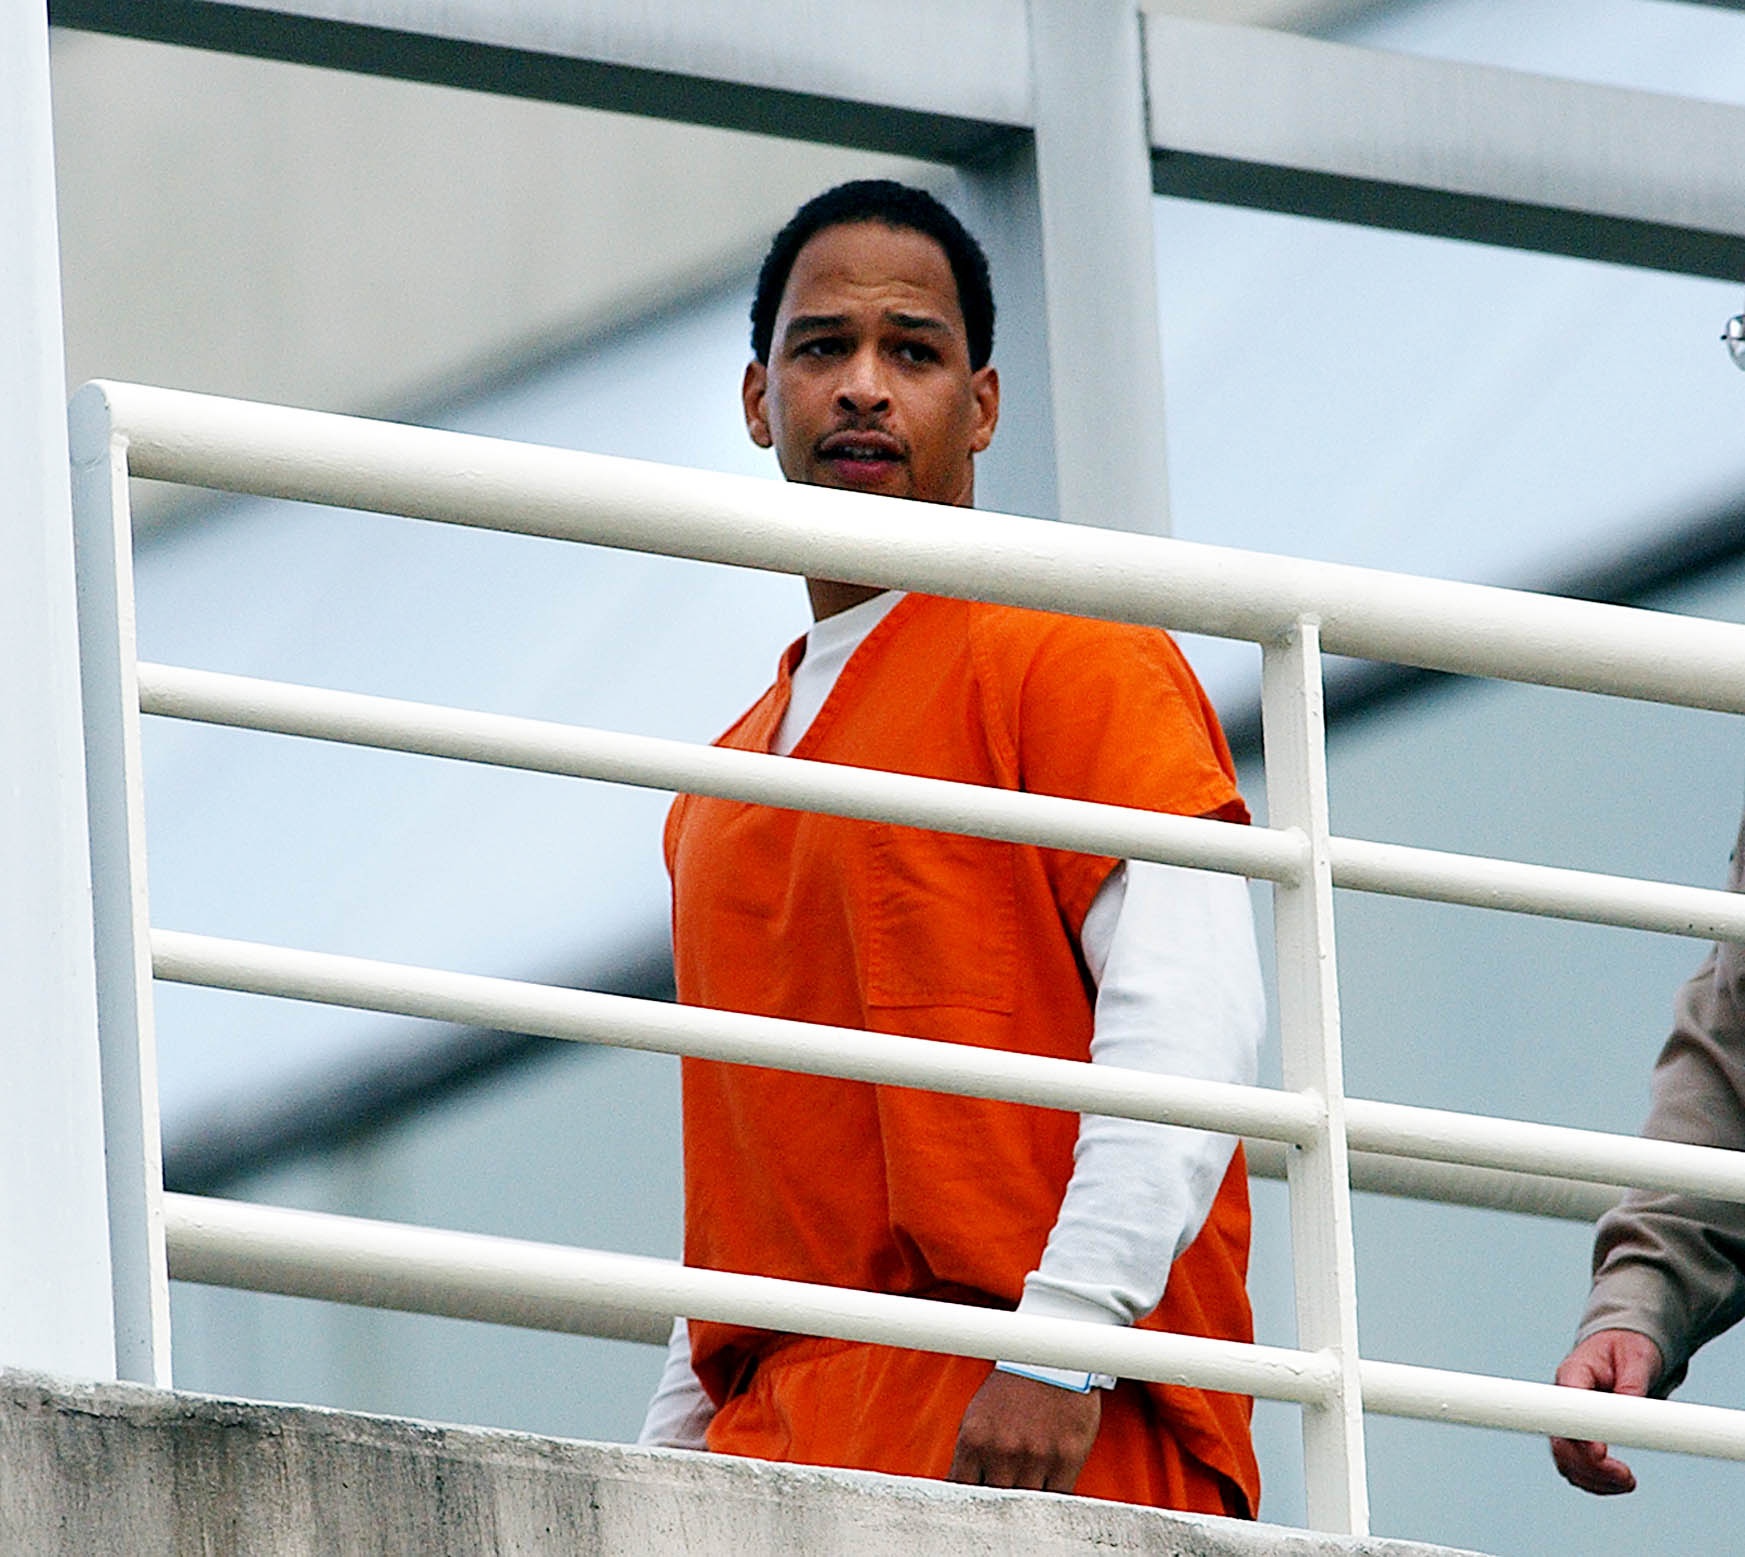 PHOTO: Former Carolina Panther Rae Carruth is escorted by Mecklenburg County Sherrif deputies into the Mecklenburg County Courthouse for a civil hearing, Oct. 13, 2003, in Charlotte, N.C.